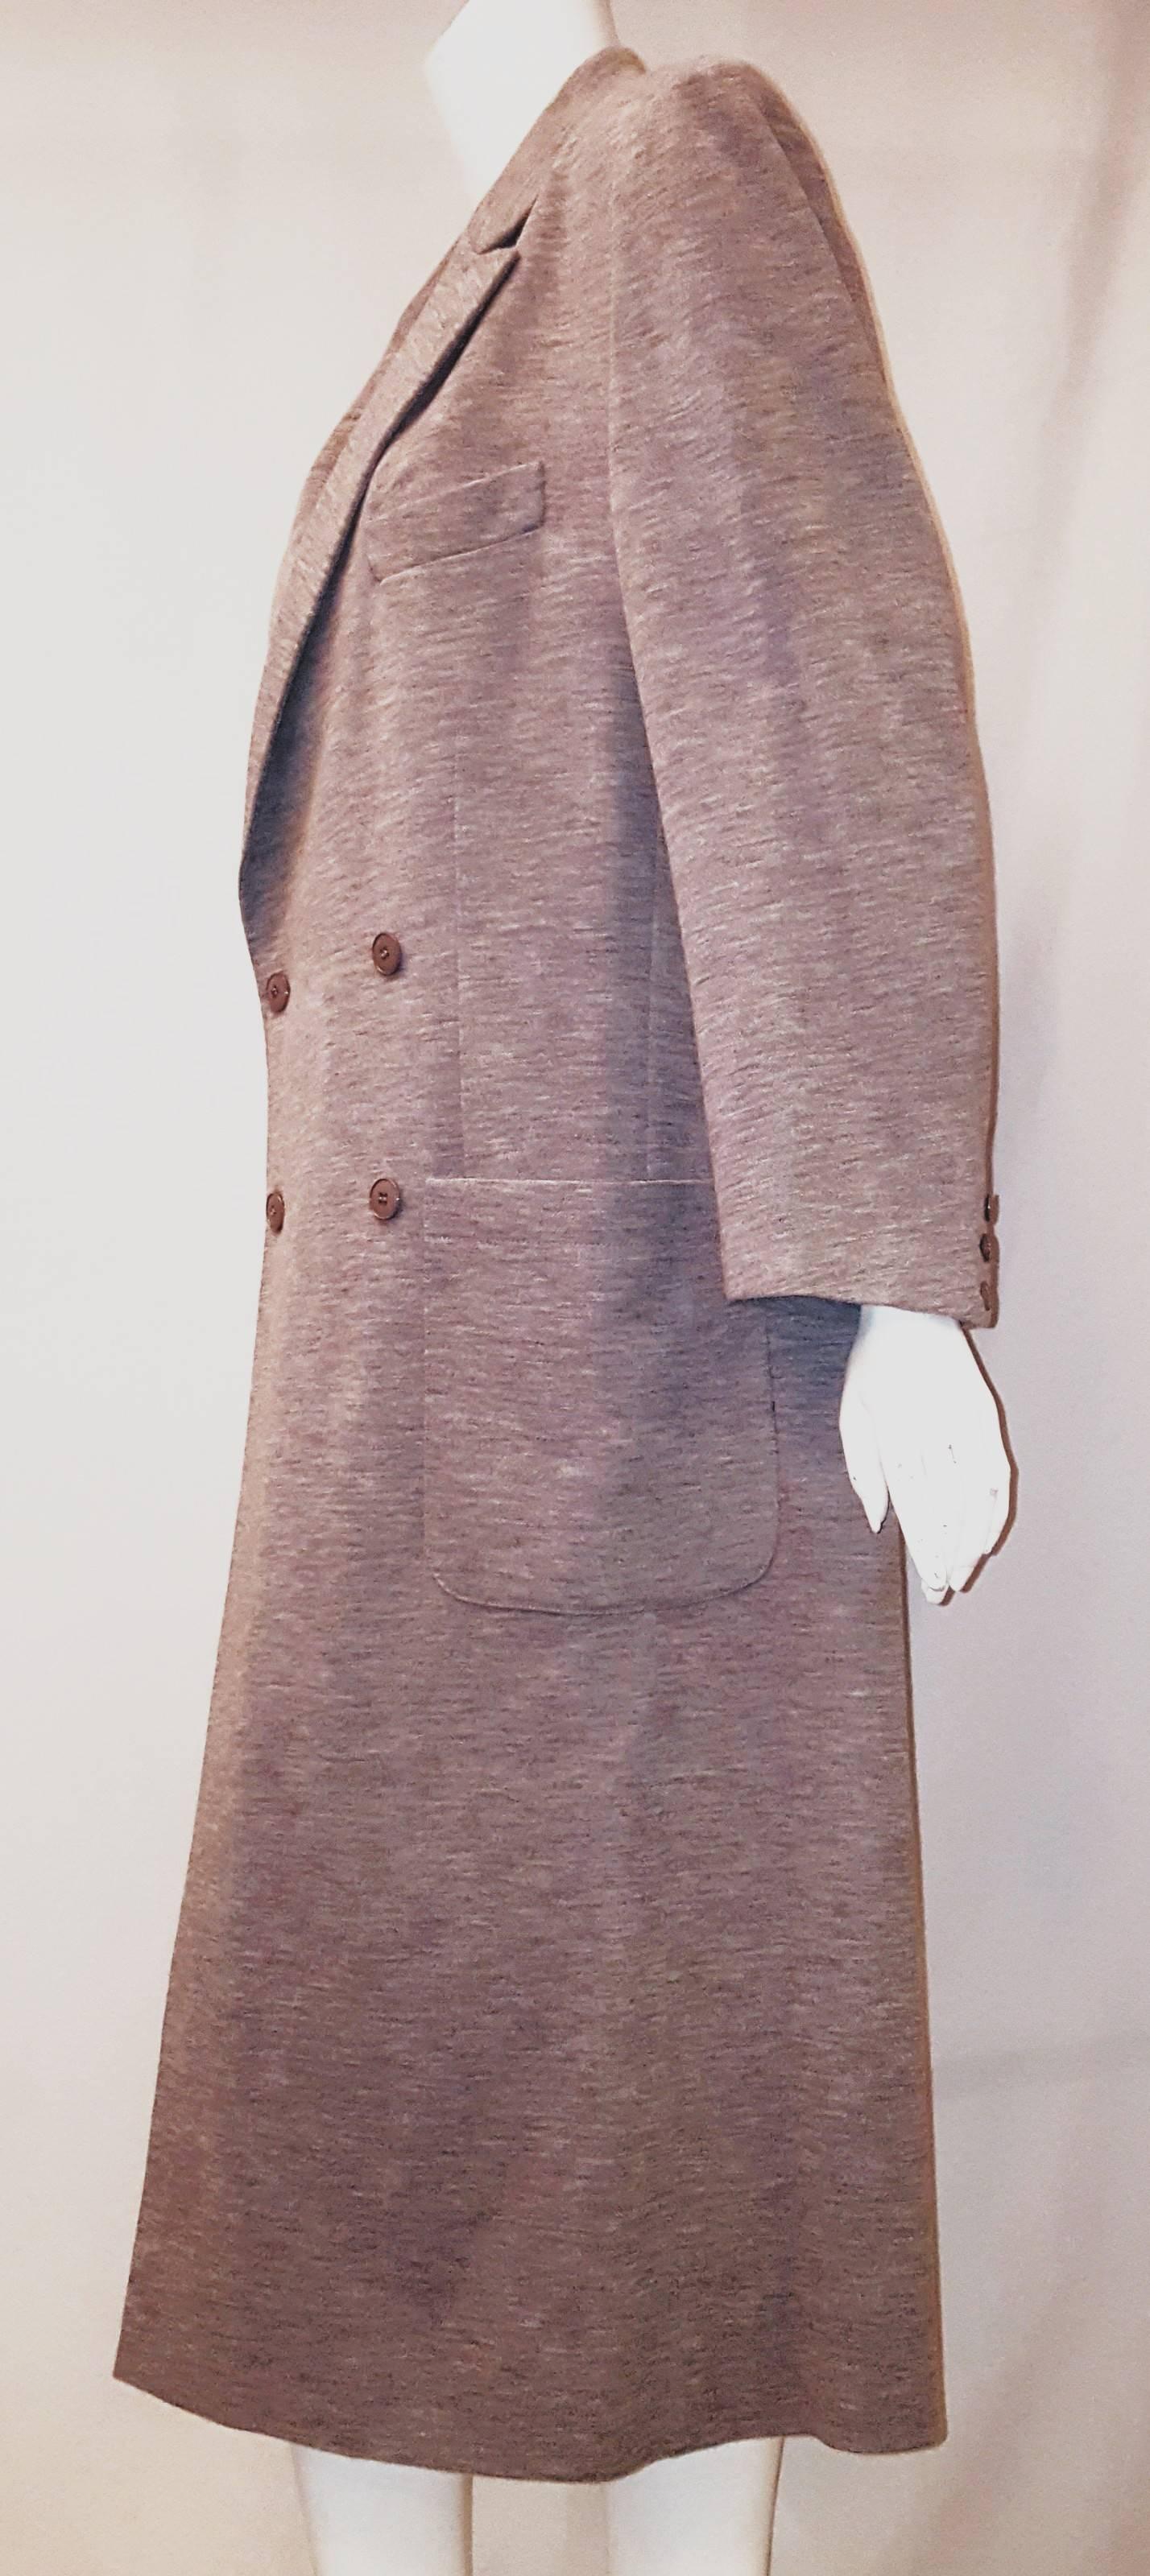 Sonia Rykiel grey wool double breasted coat with 4 buttons for closure and a single button at lapel. The 